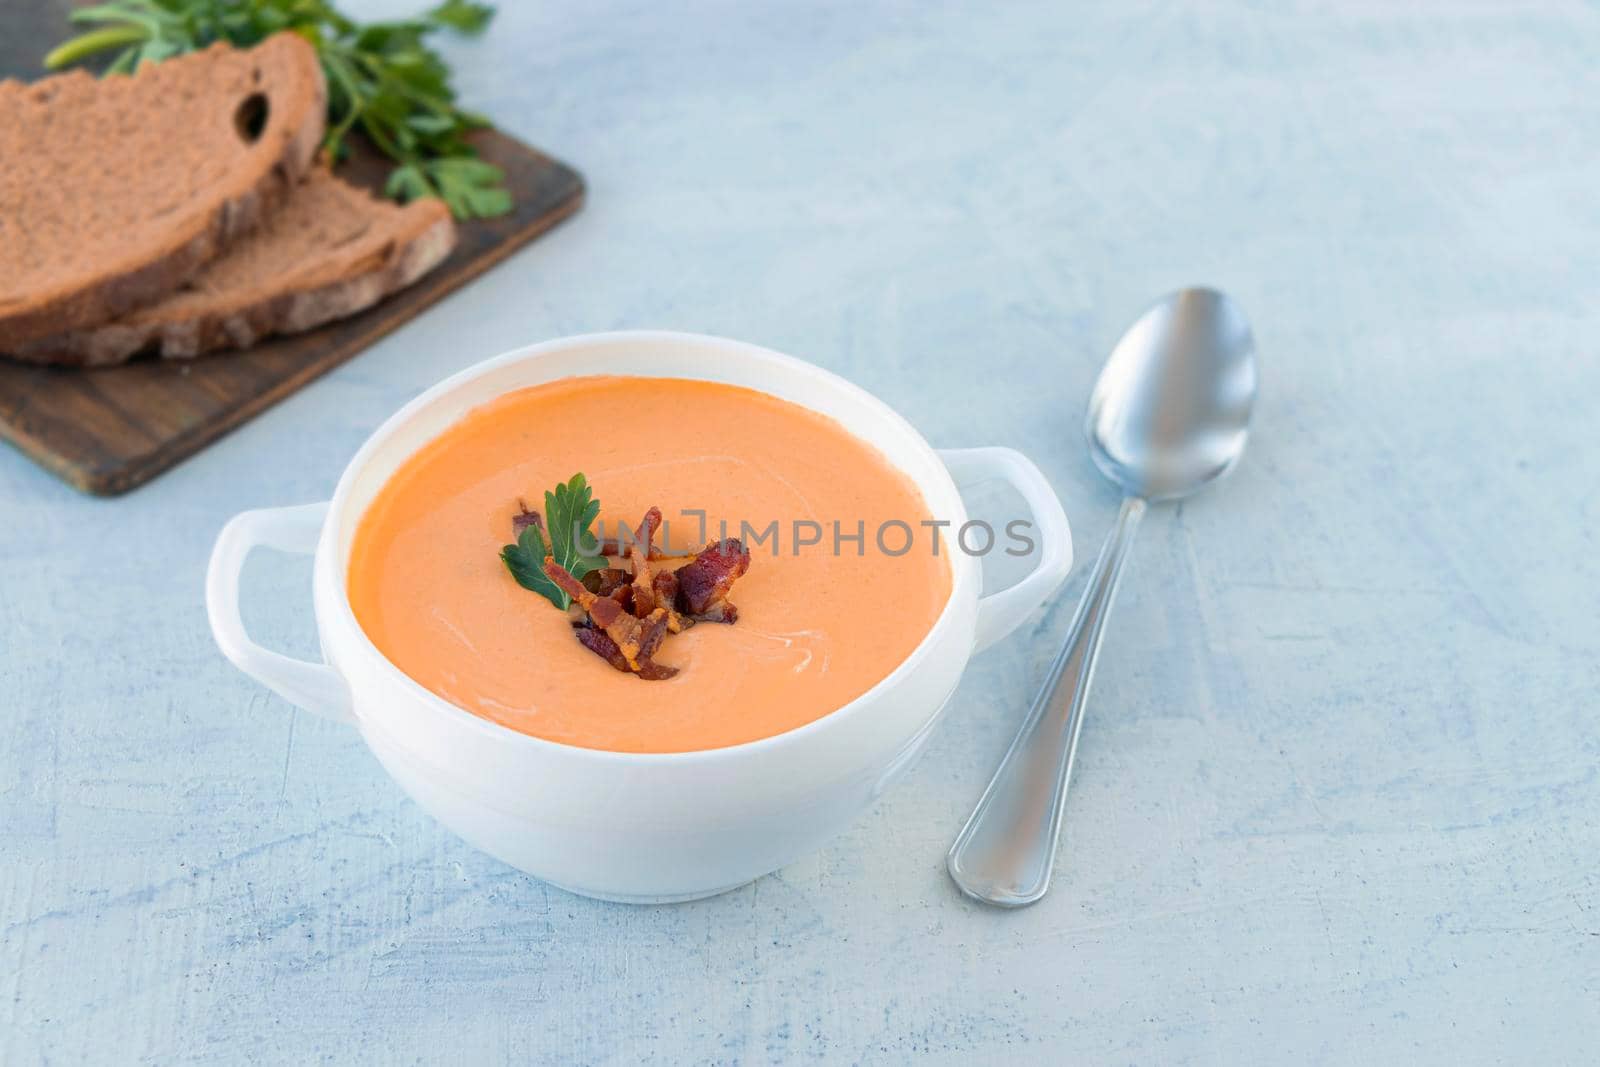 pumpkin soup with fried bacon, served in a white tureen with a spoon and slices of bread and parsley. warming hearty orange soup on a cold autumn day. by Leoschka